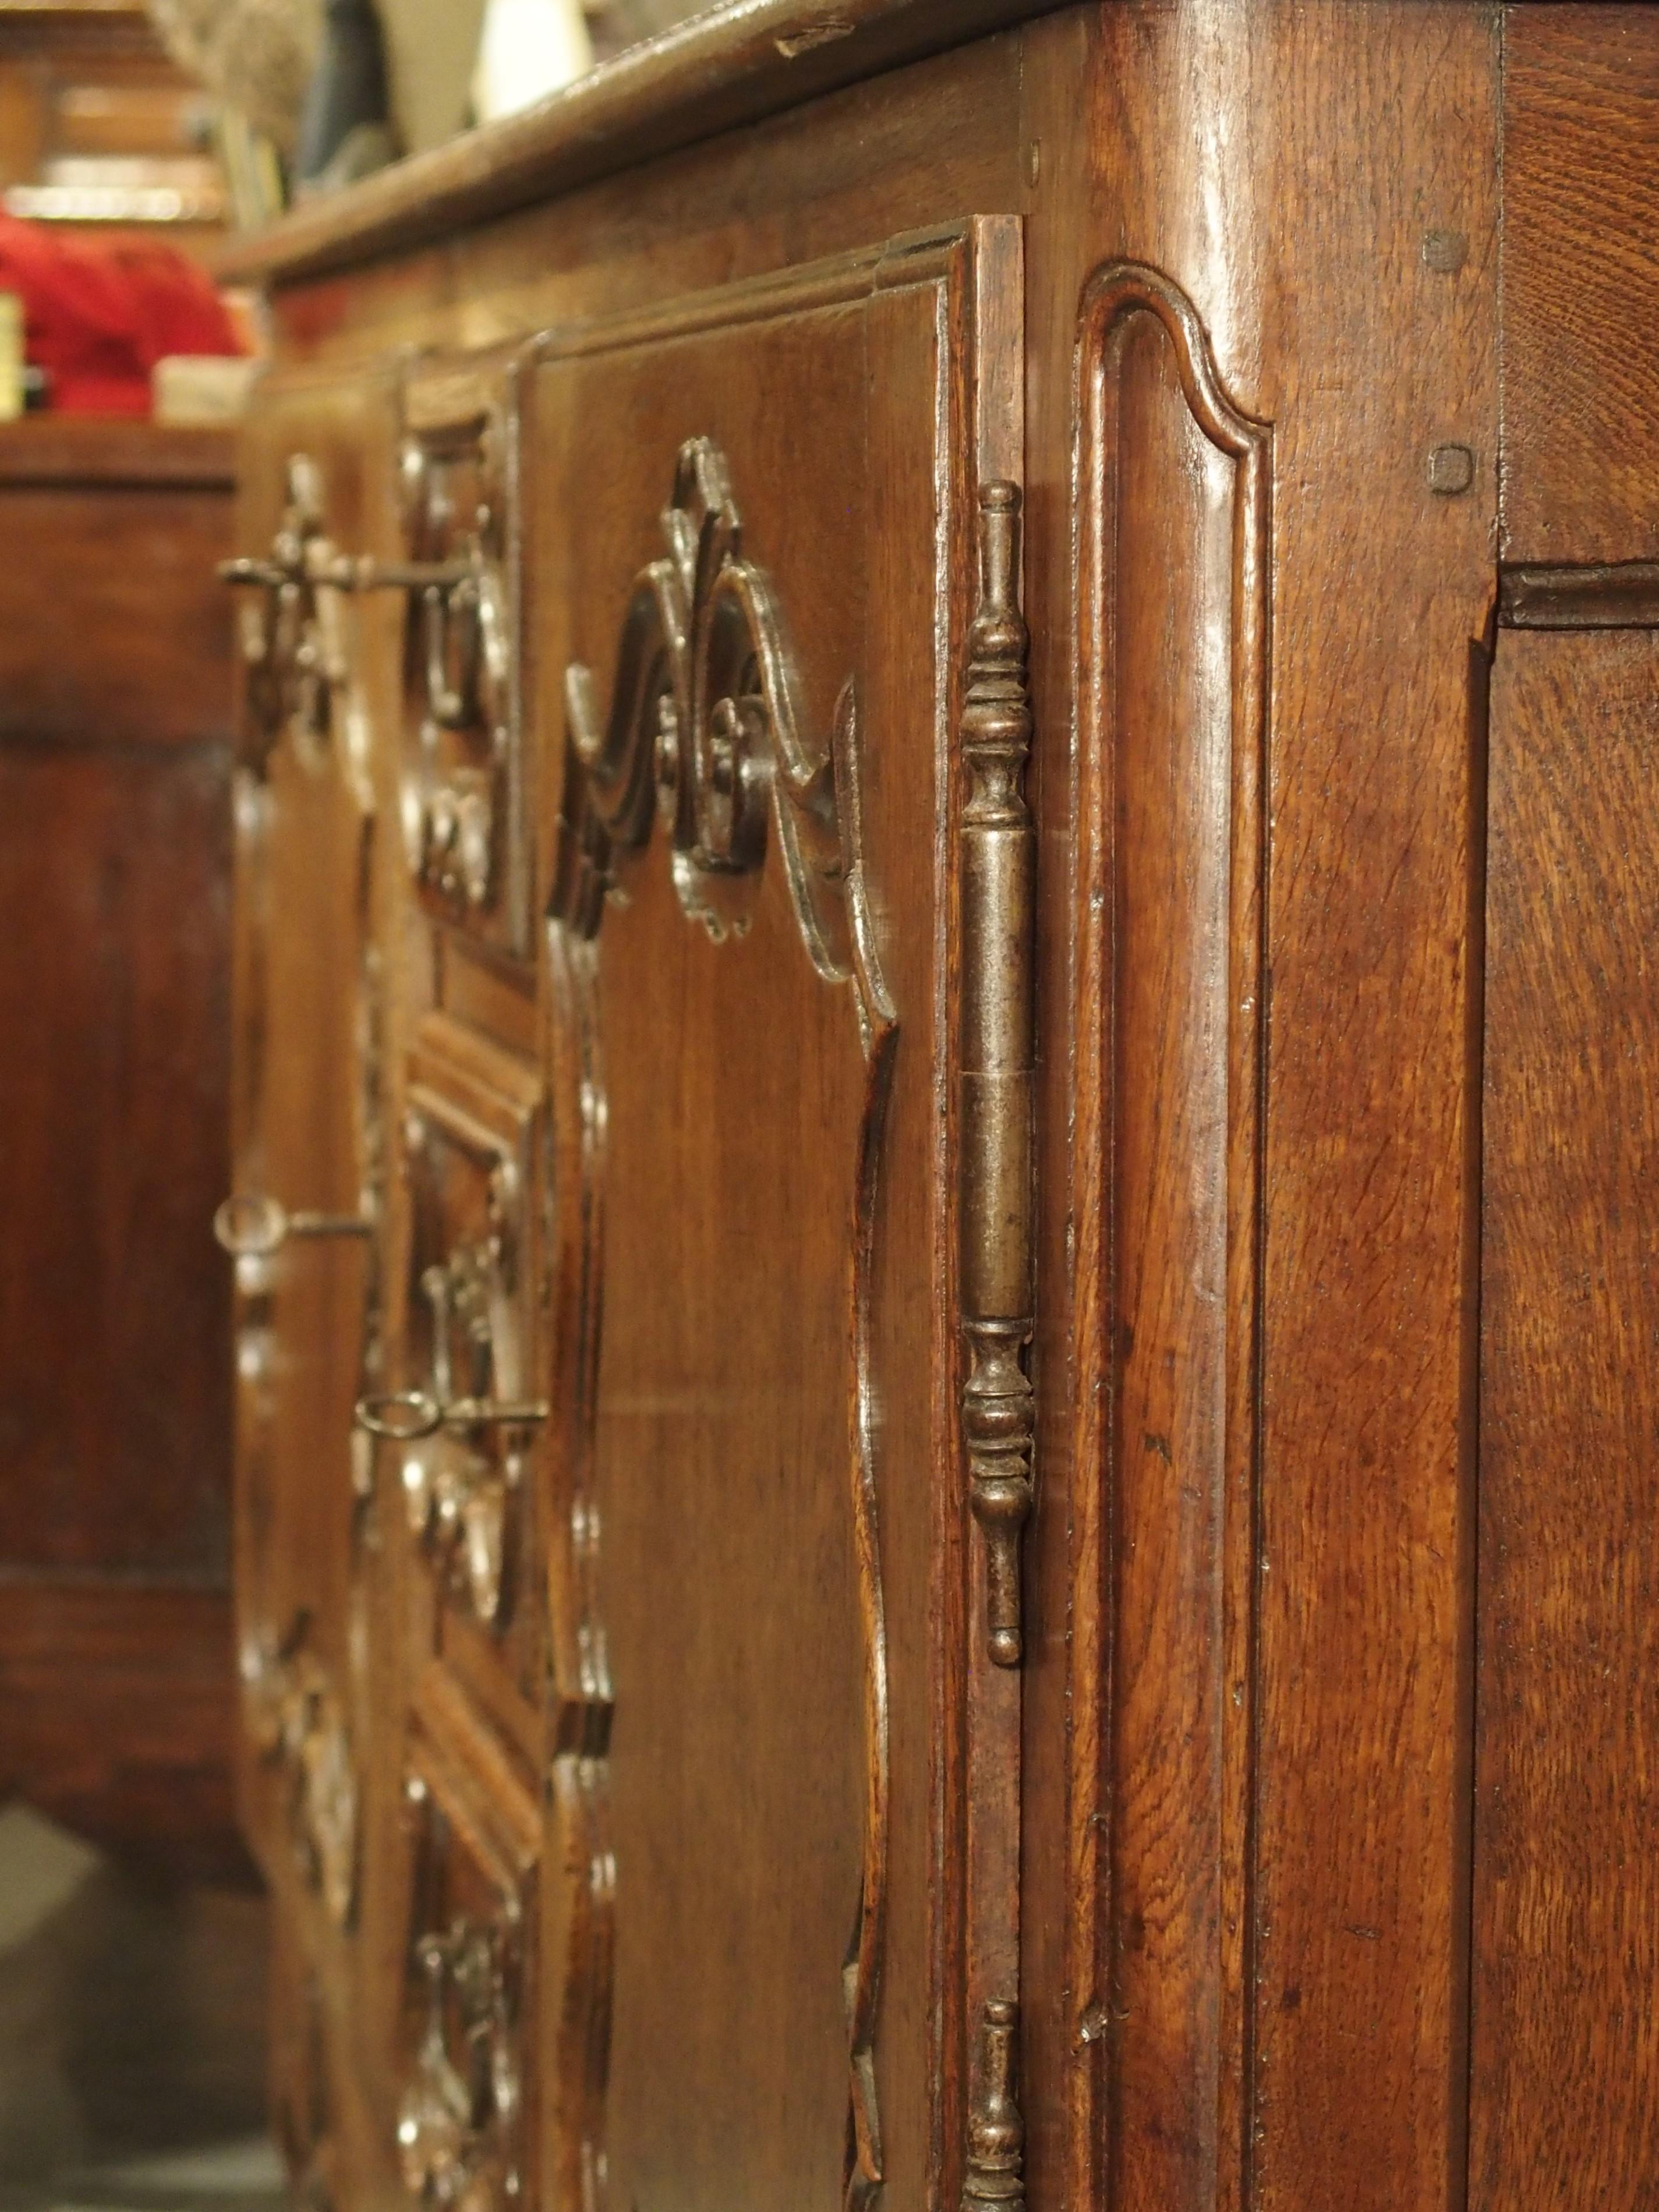 Hand-carved in France during the 1700’s, this amazing oak buffet has two doors on iron hinges that are separated by three vertically stacked drawers. This orientation is often found in buffets produced in the Lorraine region, which borders Germany,